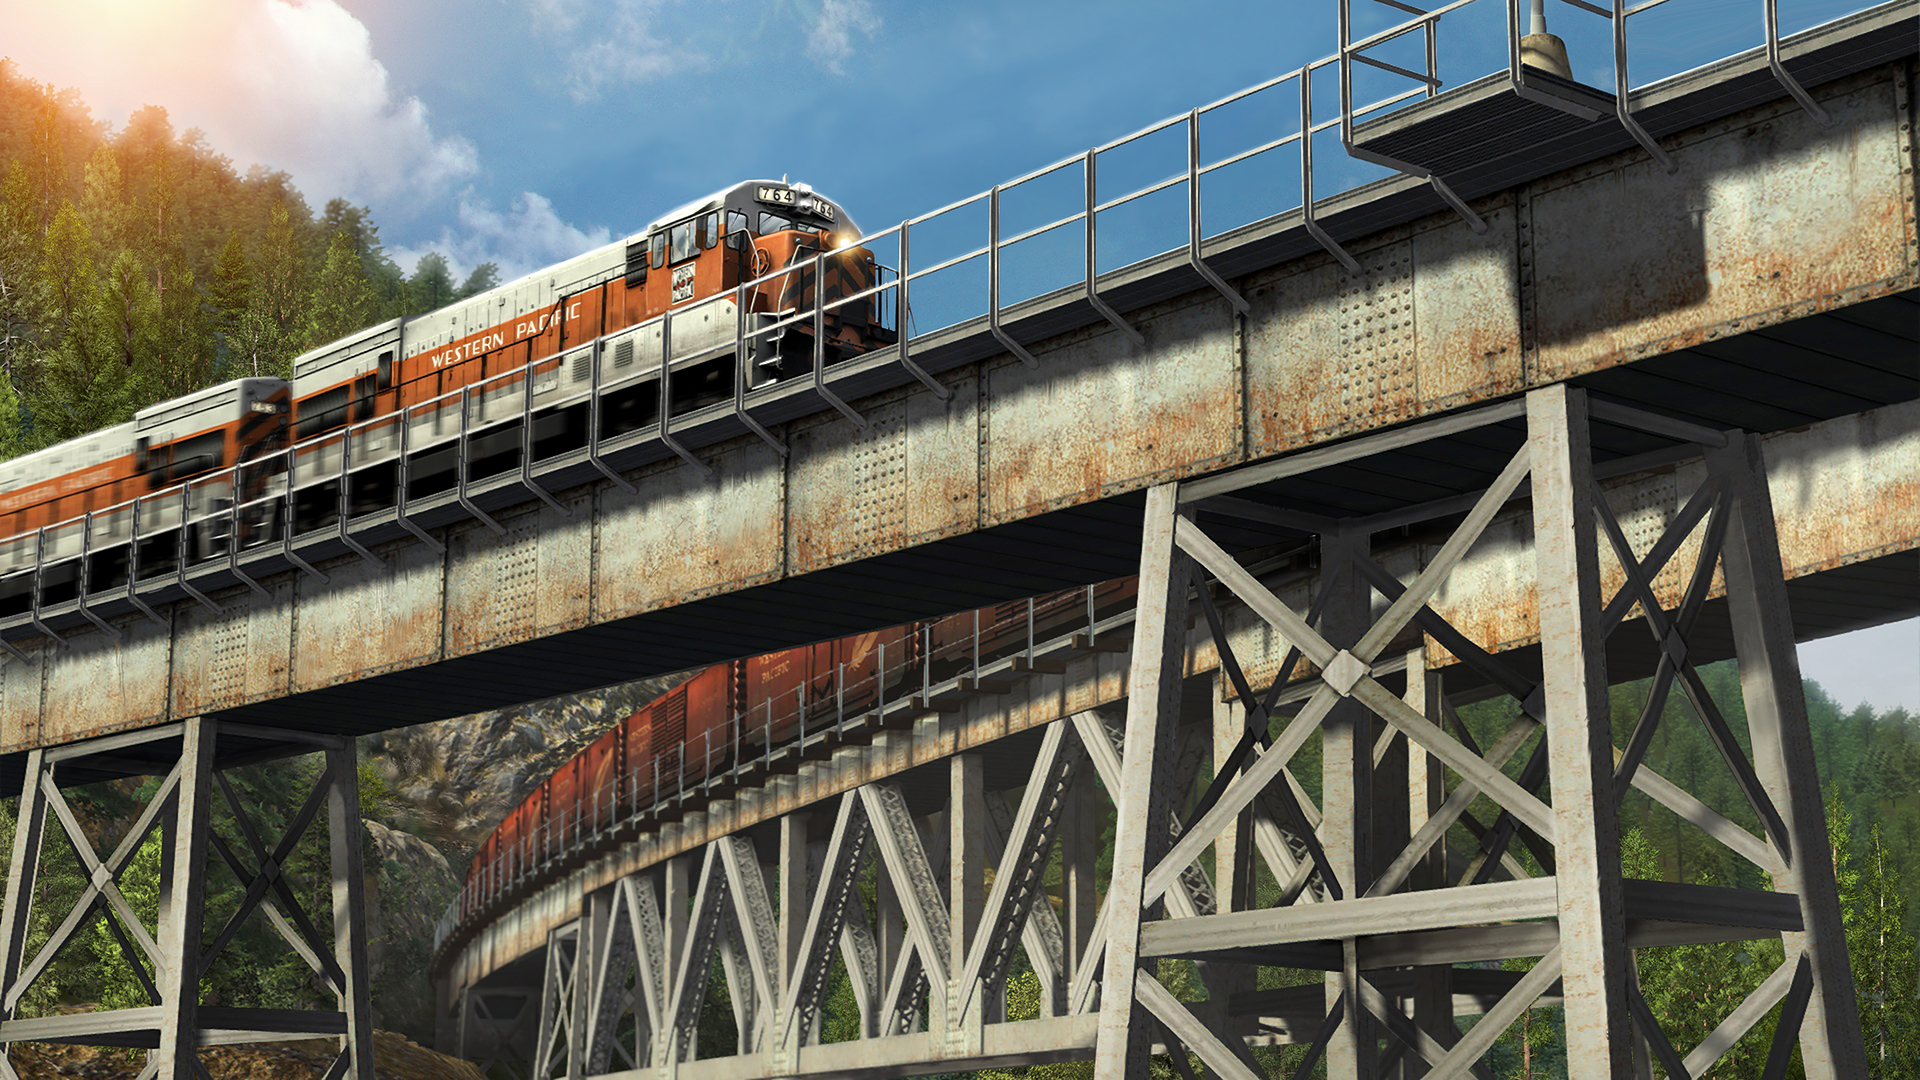 Train Simulator: Feather River Canyon Route Add-On screenshot